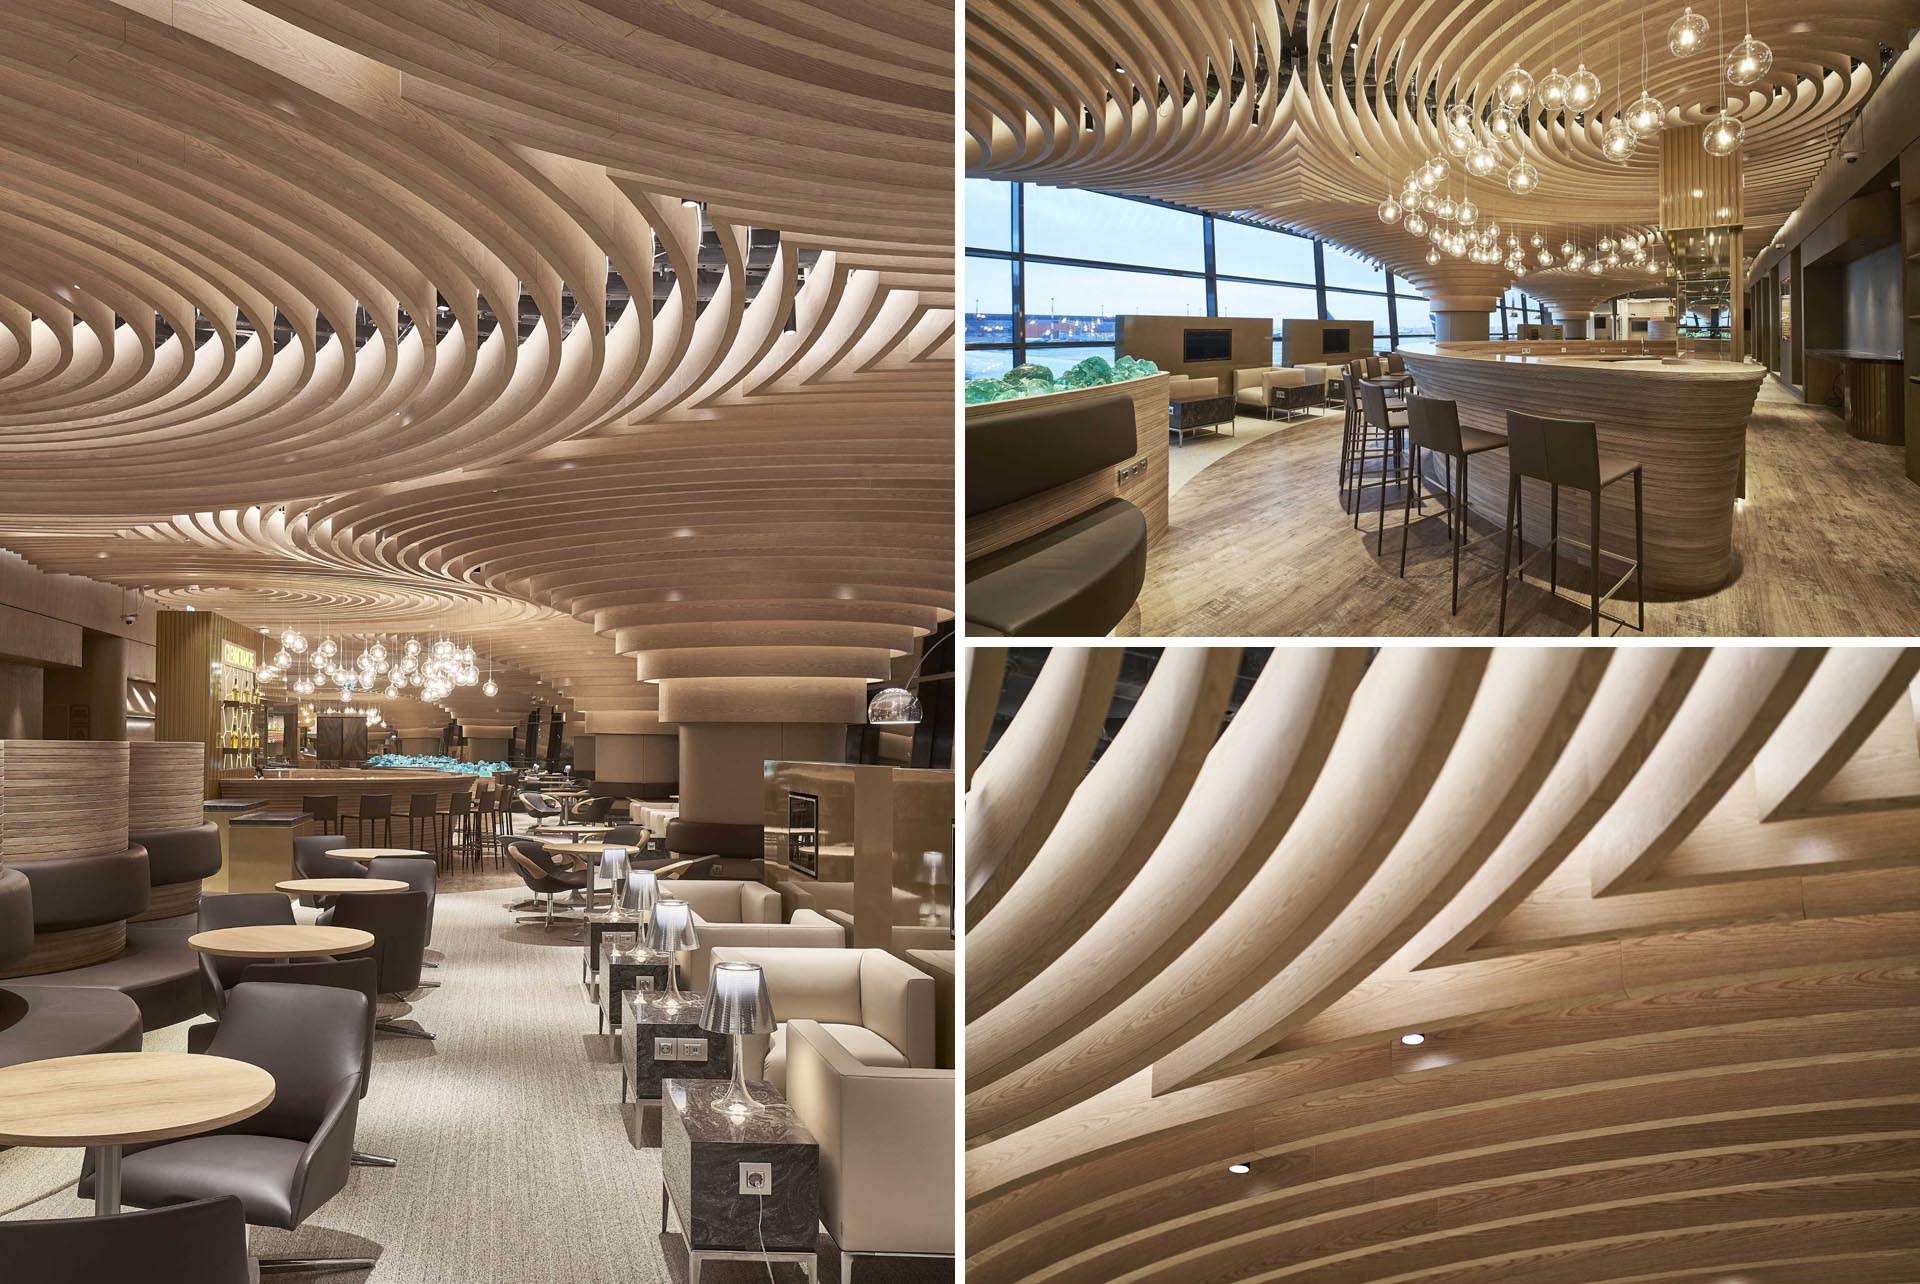 An airport lounge with circular wood design elements on the ceiling.